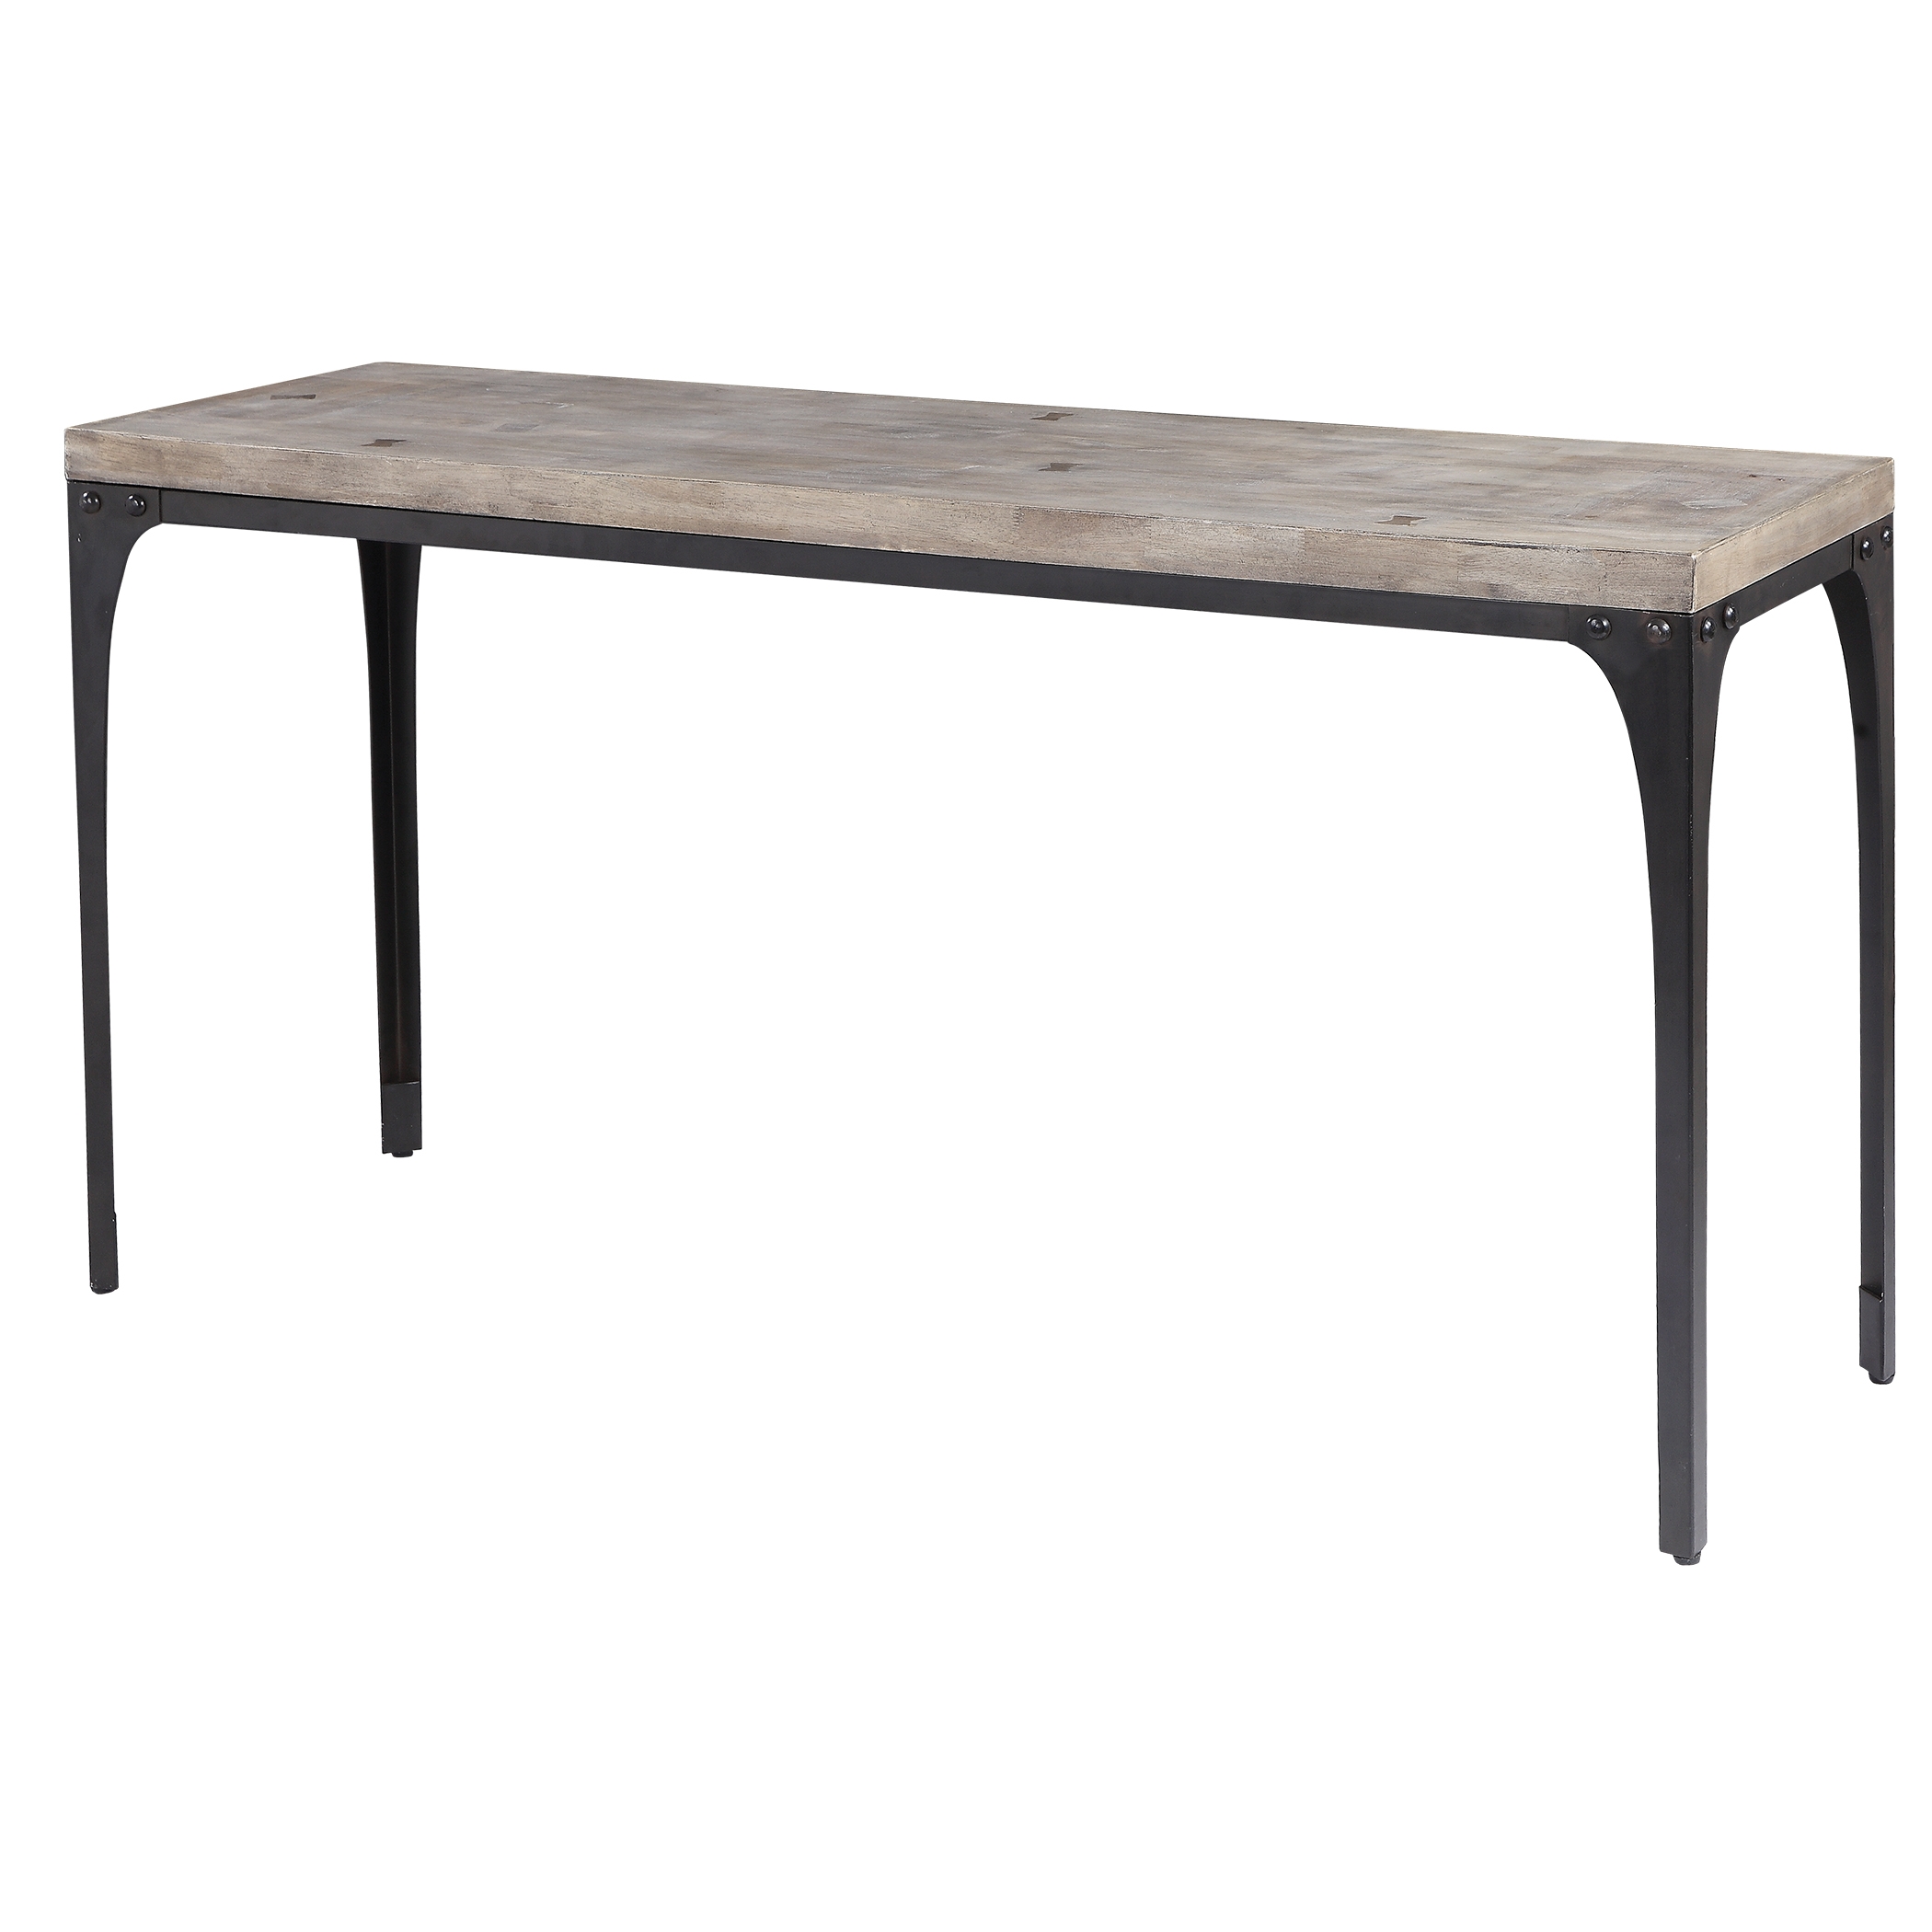 Blaylock Industrial Console Table - Image 5